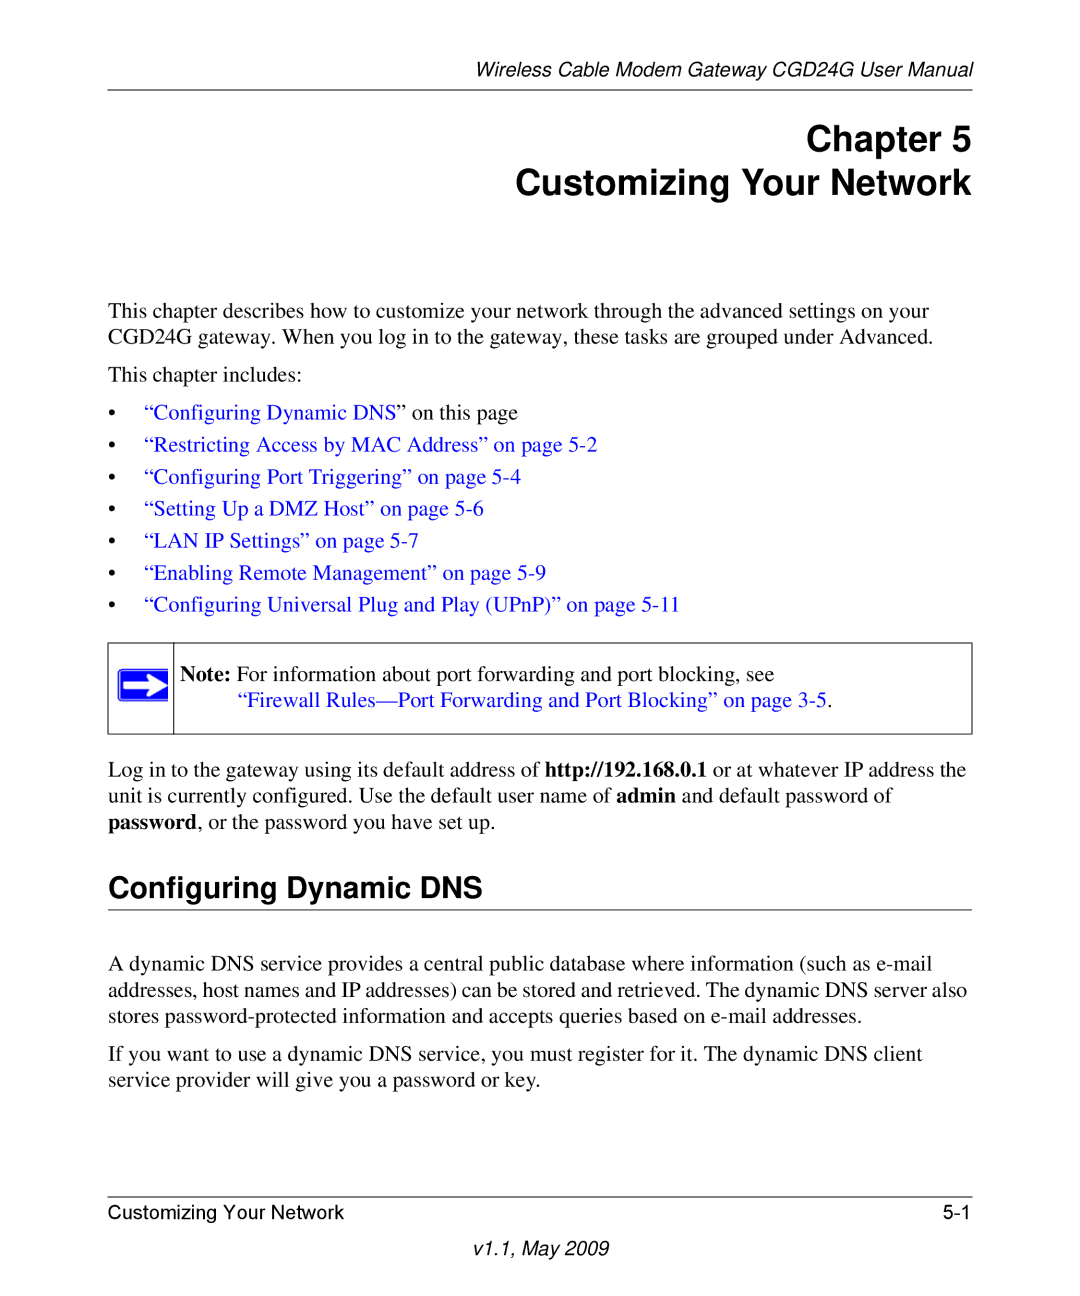 Gateway CGD24G user manual Chapter Customizing Your Network, Configuring Dynamic DNS 